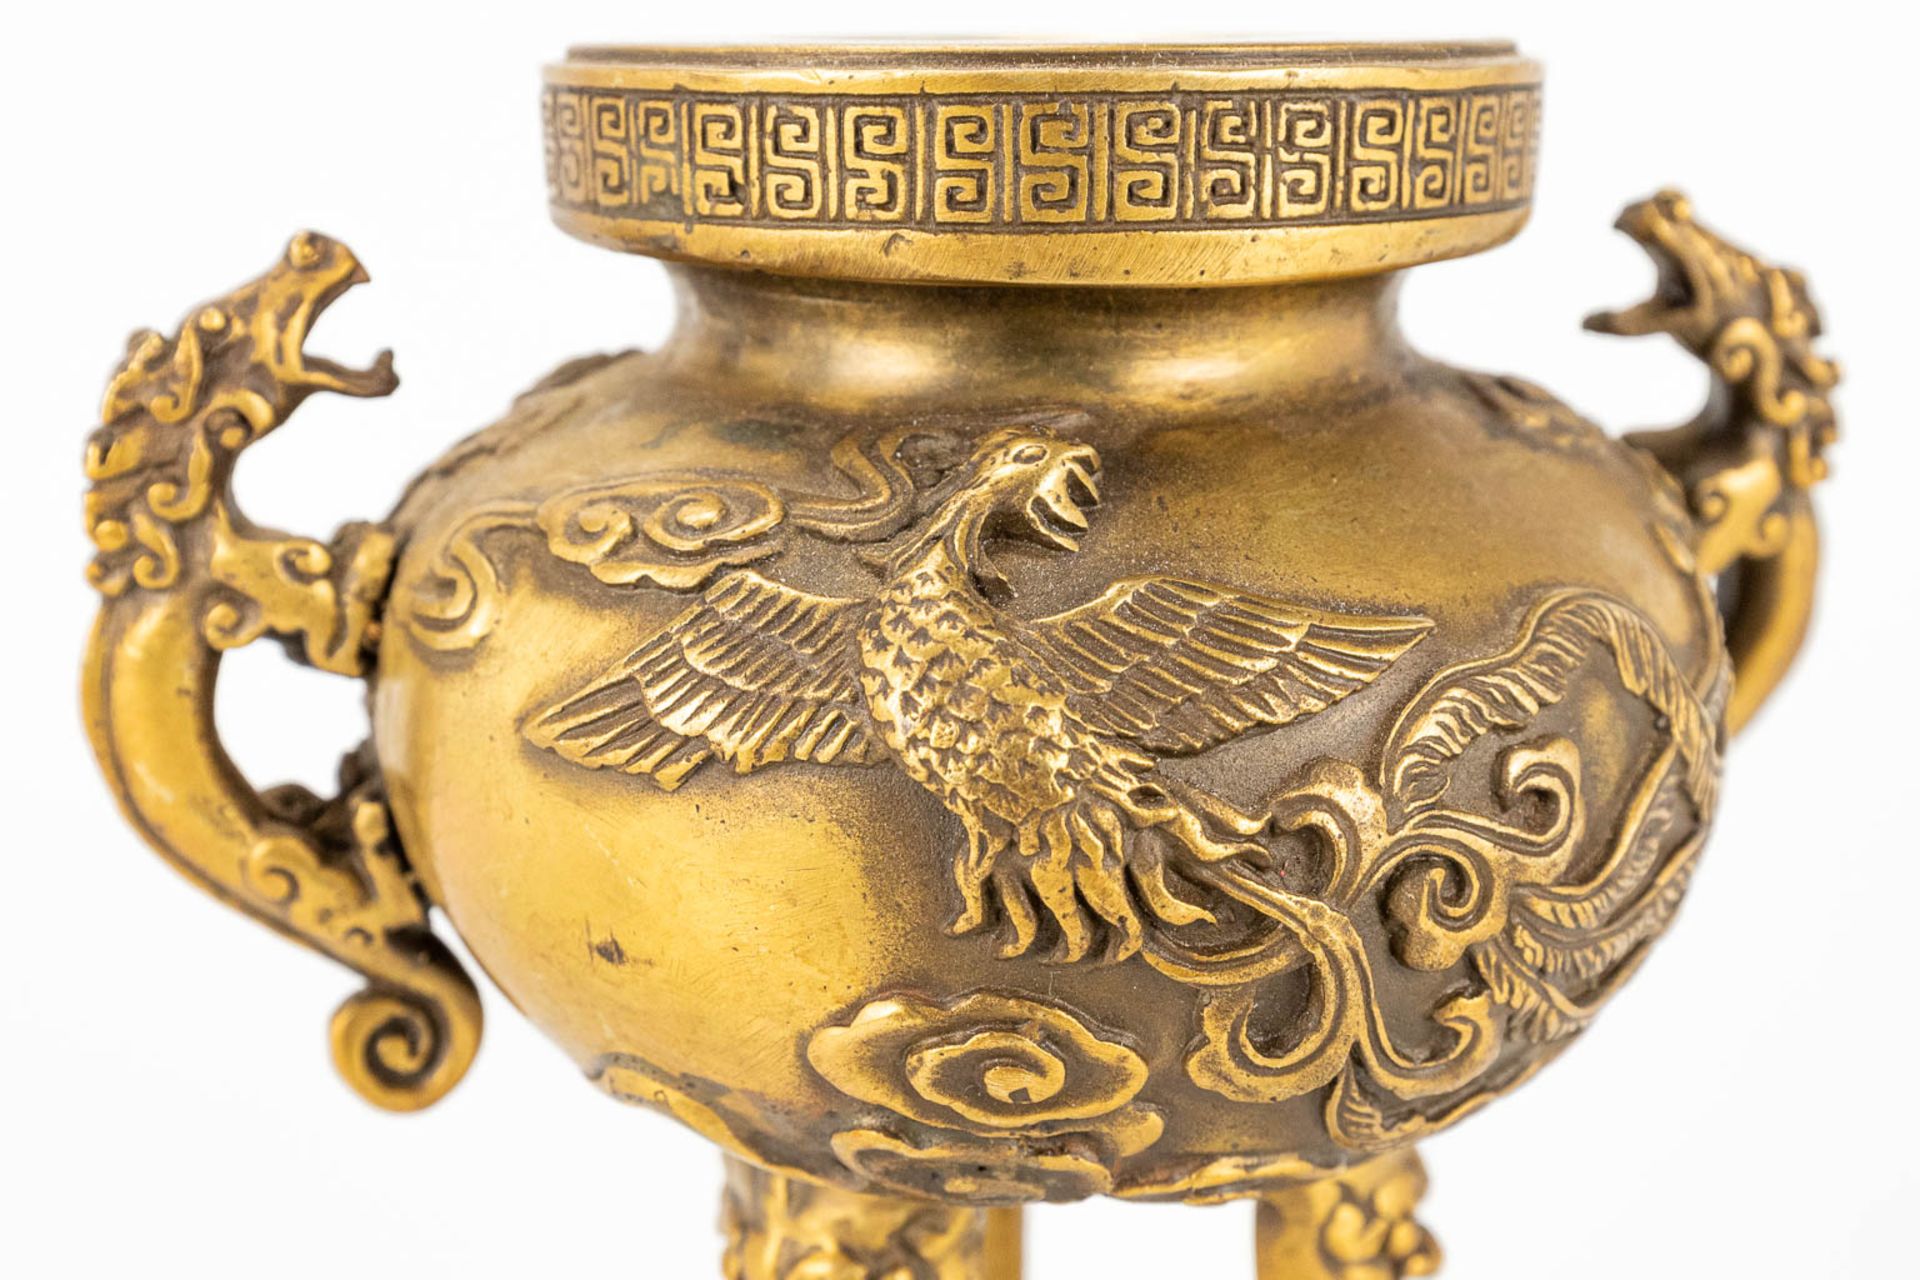 A bronze Koro Brule Parfum, decorated with dragons. - Image 11 of 12